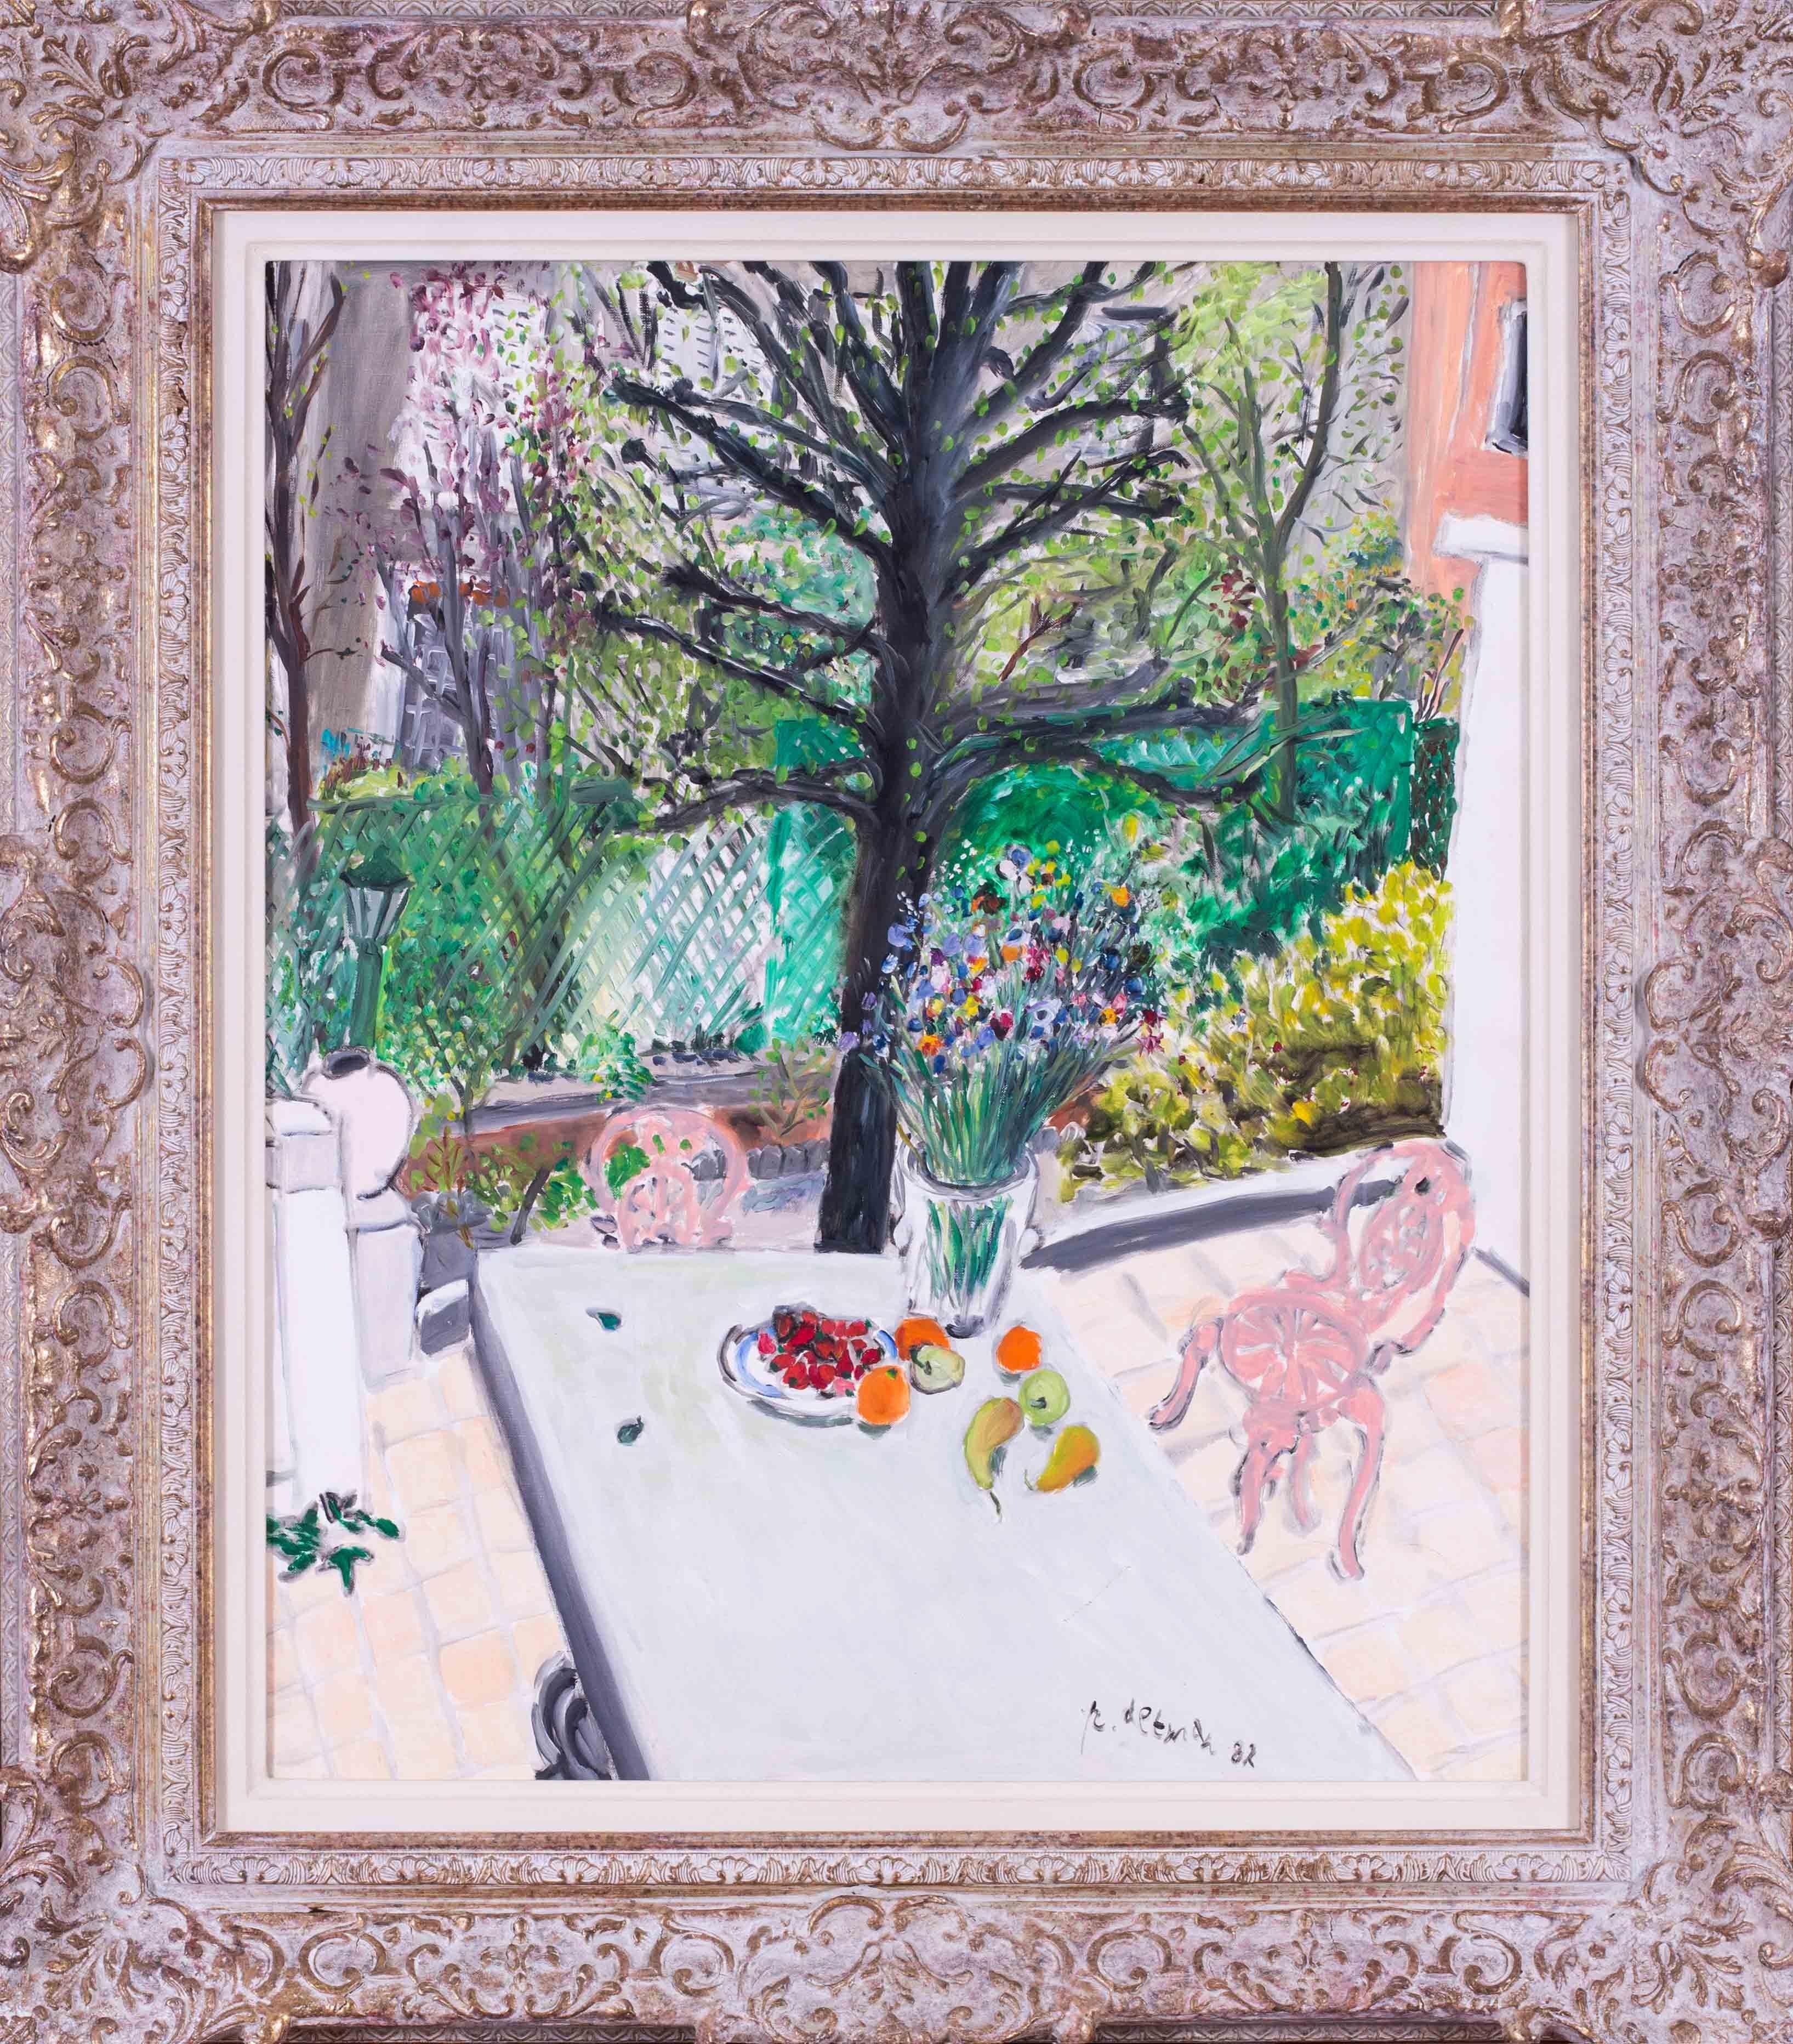 1982 naive French garden scene with table and chairs by Paul Altman